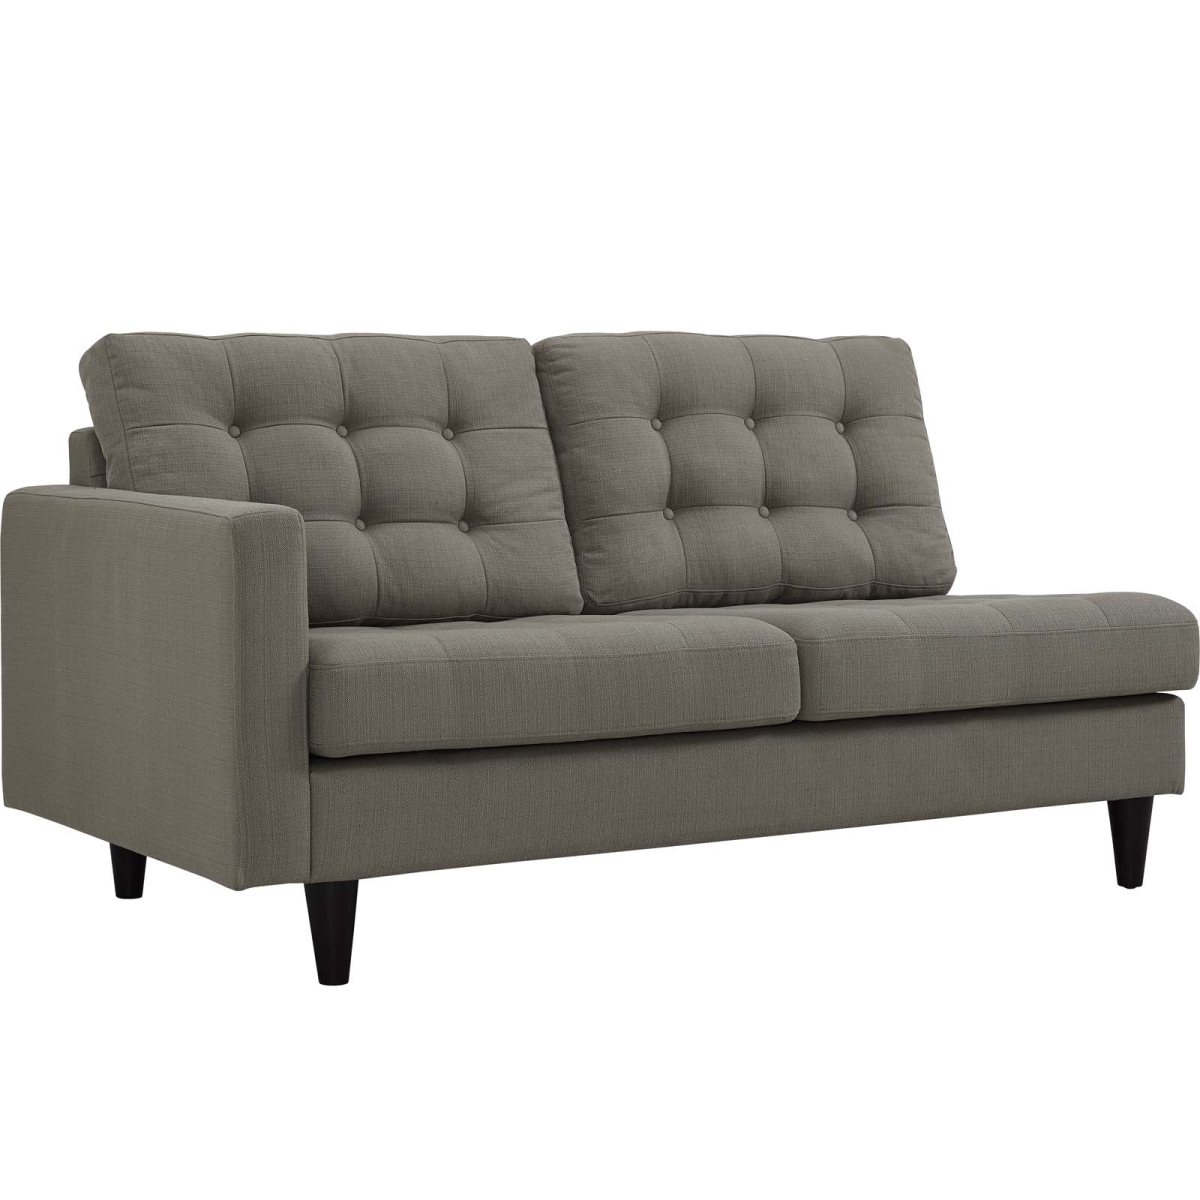 Modway Eei-2589-gra 34 H X 34 W X 64.5 L In. Empress Left-facing Upholstered Fabric Loveseat, Gray